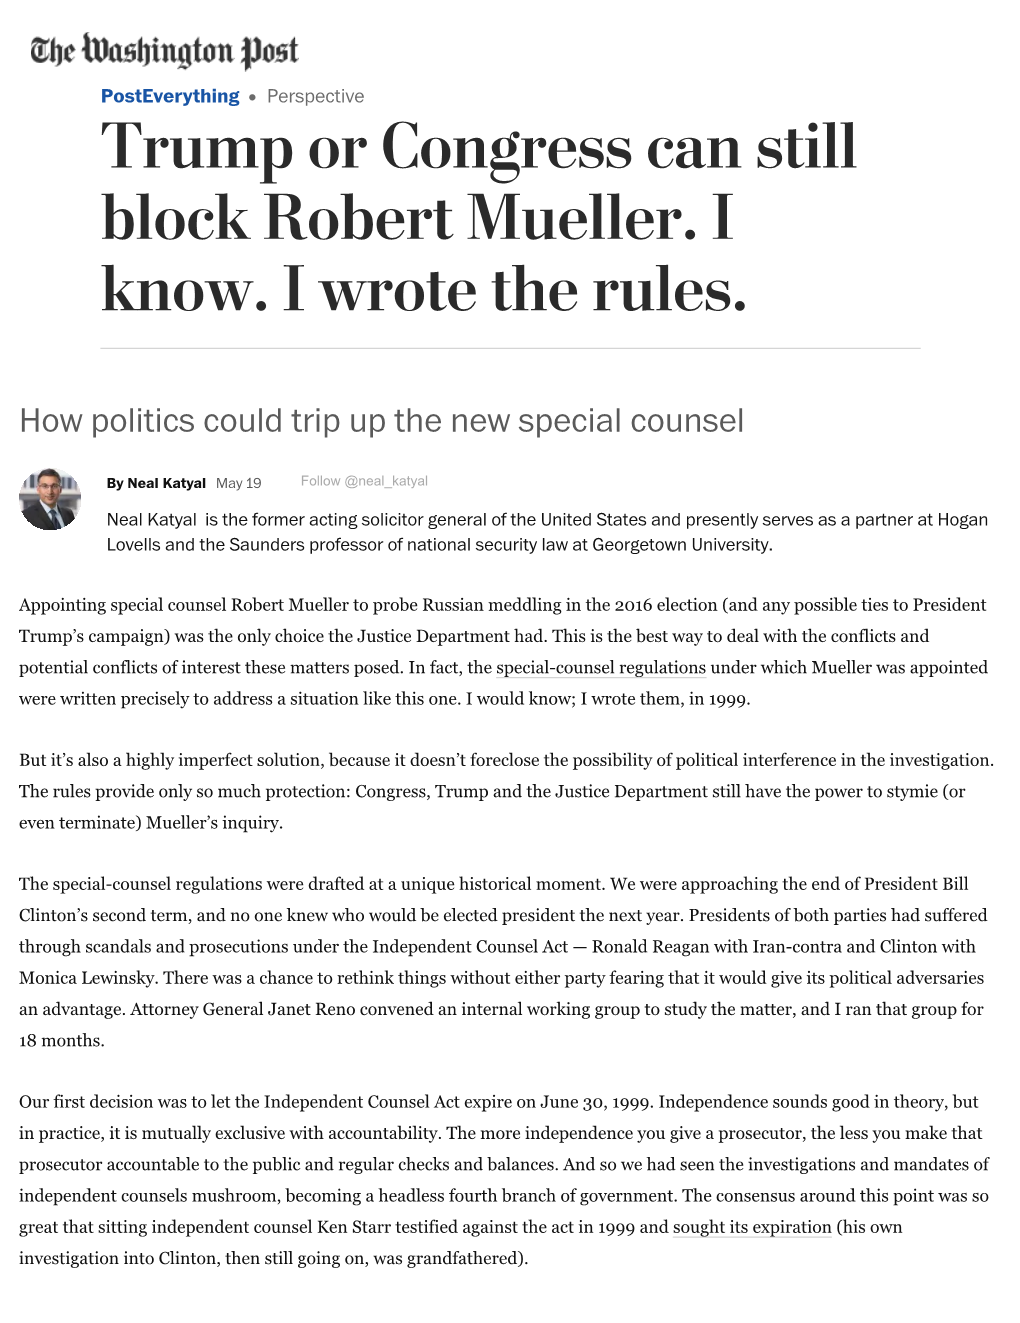 Trump Or Congress Can Still Block Robert Mueller. I Know. I Wrote the Rules